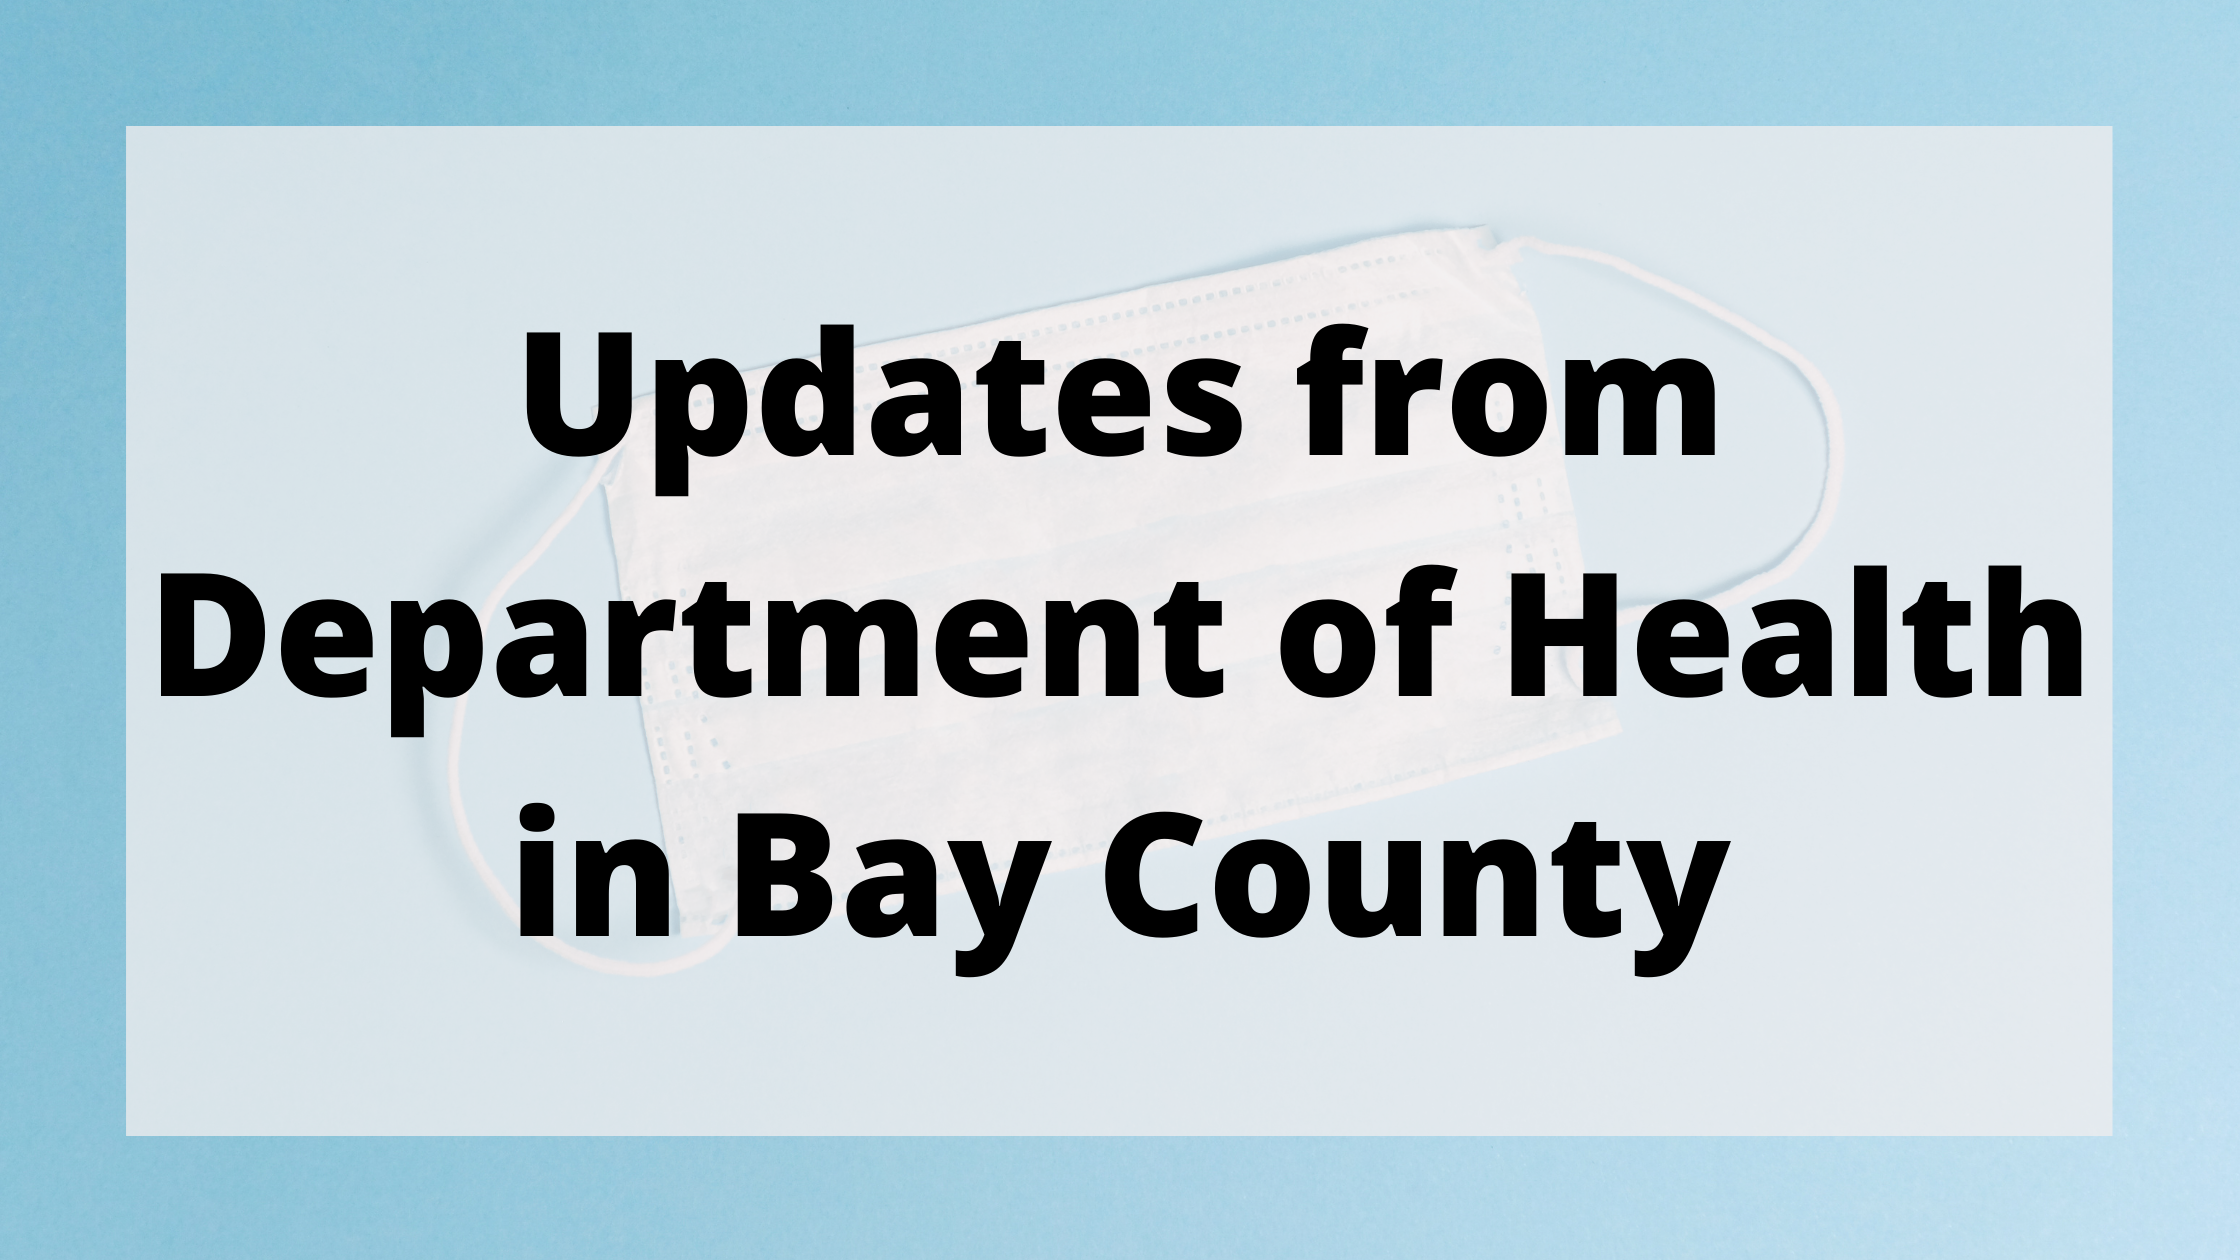 01/20/2021-Updates from Department of Health in Bay County